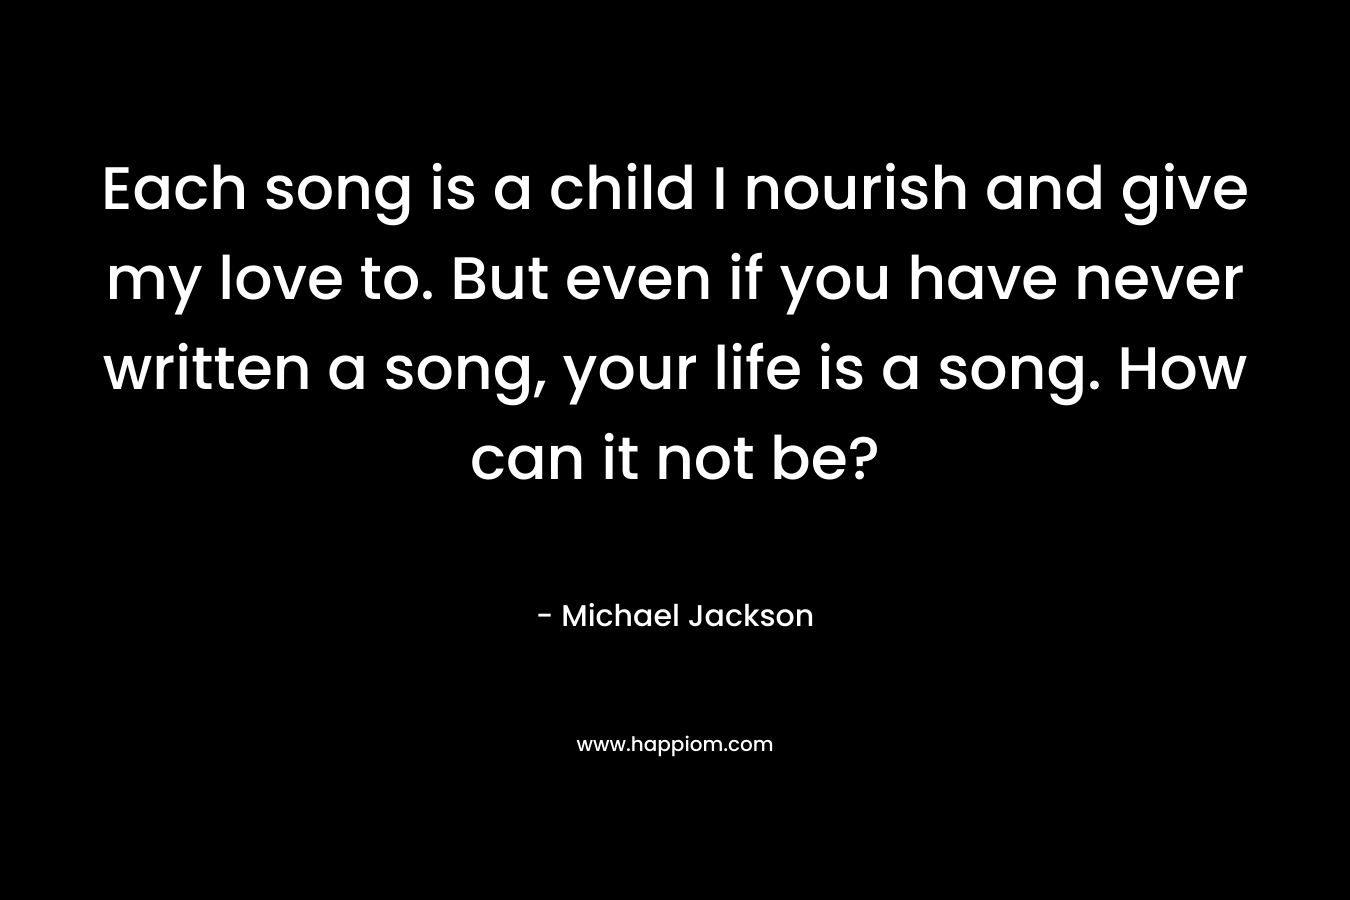 Each song is a child I nourish and give my love to. But even if you have never written a song, your life is a song. How can it not be?